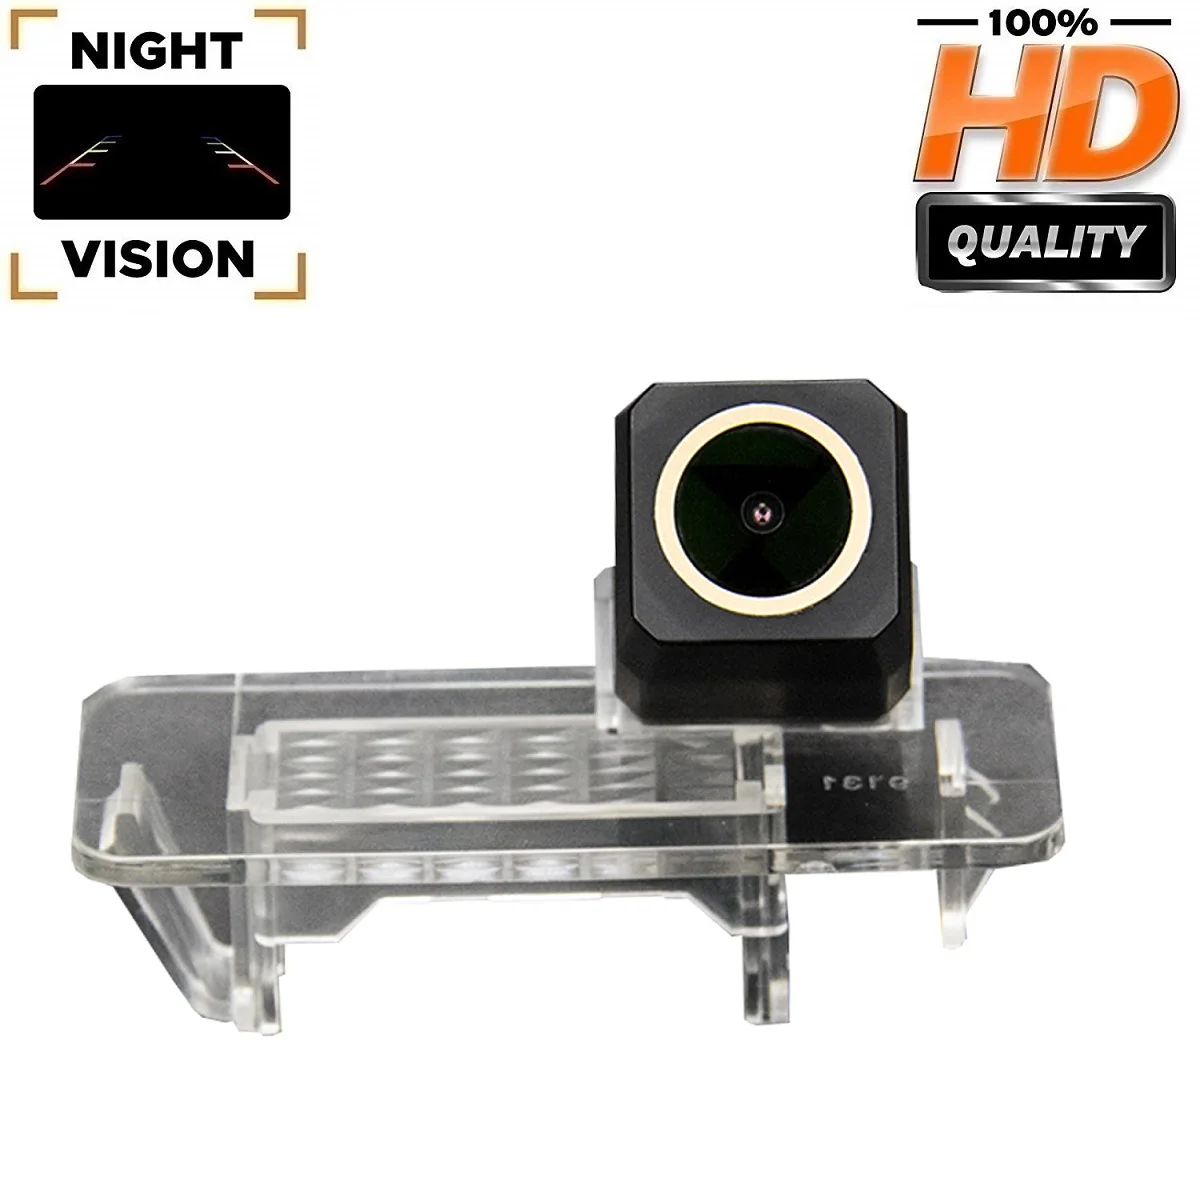 

HD 1280* 720p Rear View Night Vision Backup Camera for Mercedes Benz Smart R300/R350/Fortwo/Smart ED/Smart 451/Smart fortwo